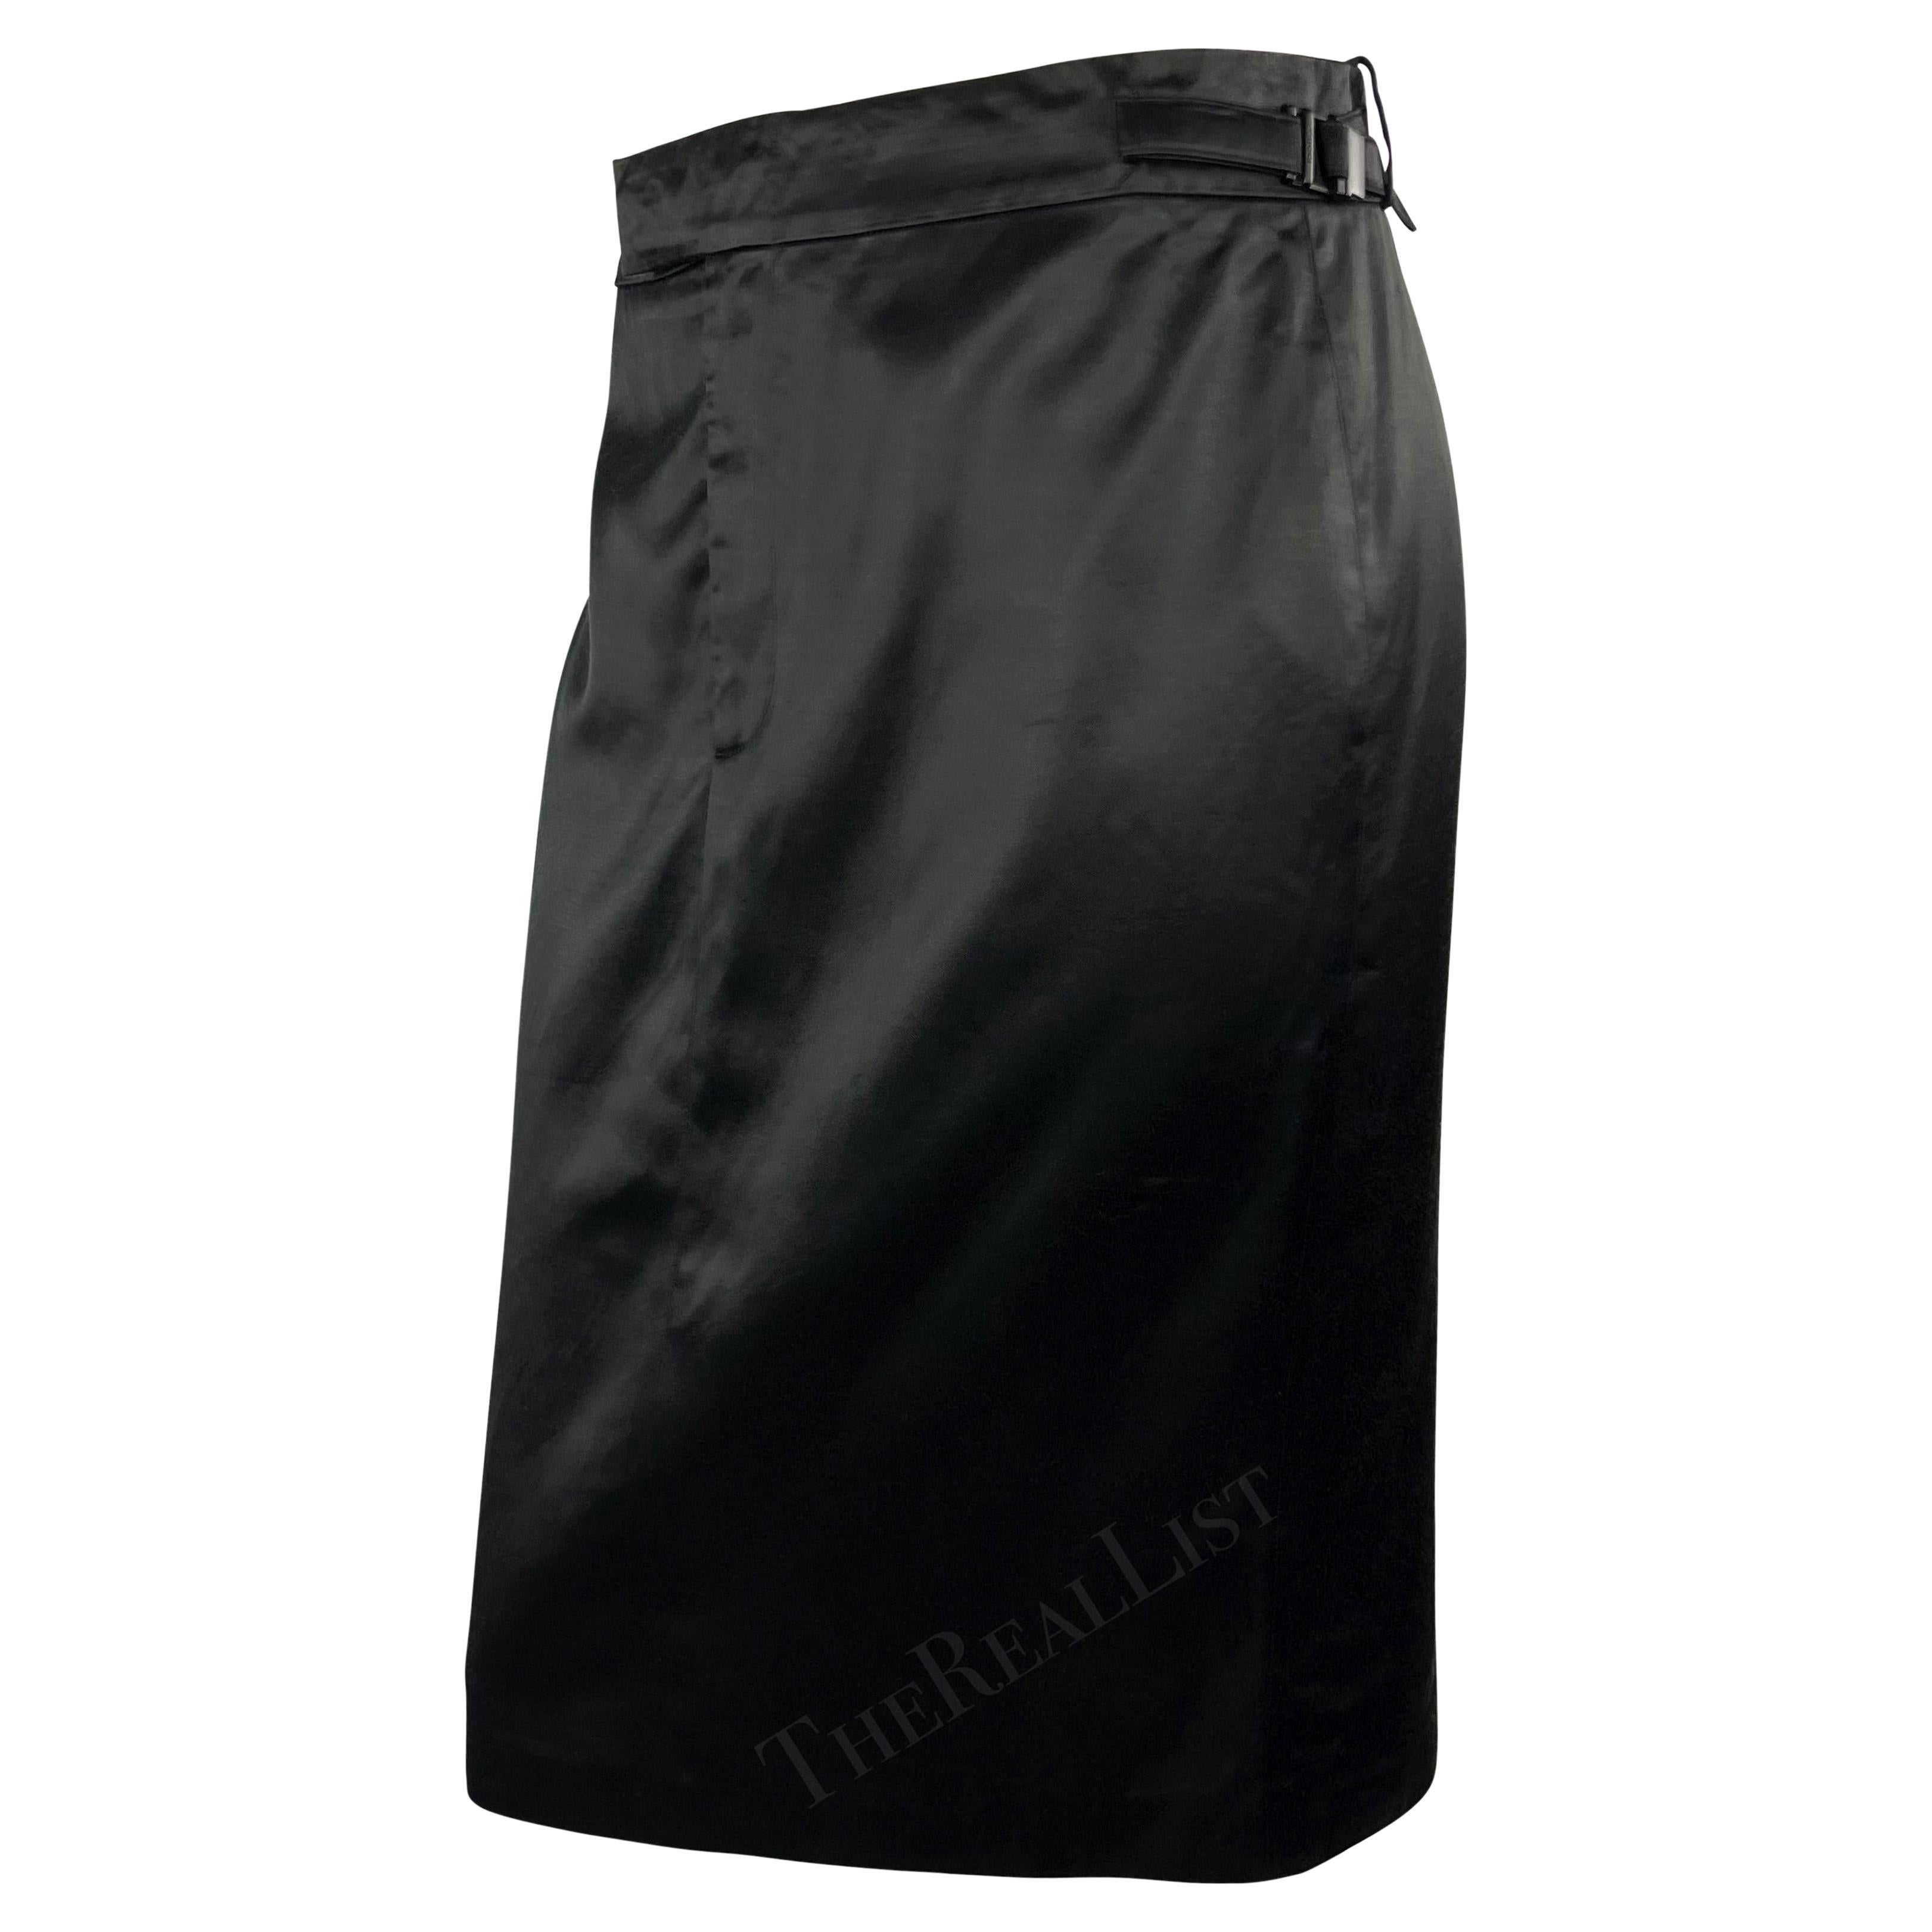 S/S 2001 Gucci by Tom Ford Black Satin Belted Runway Pencil Skirt  For Sale